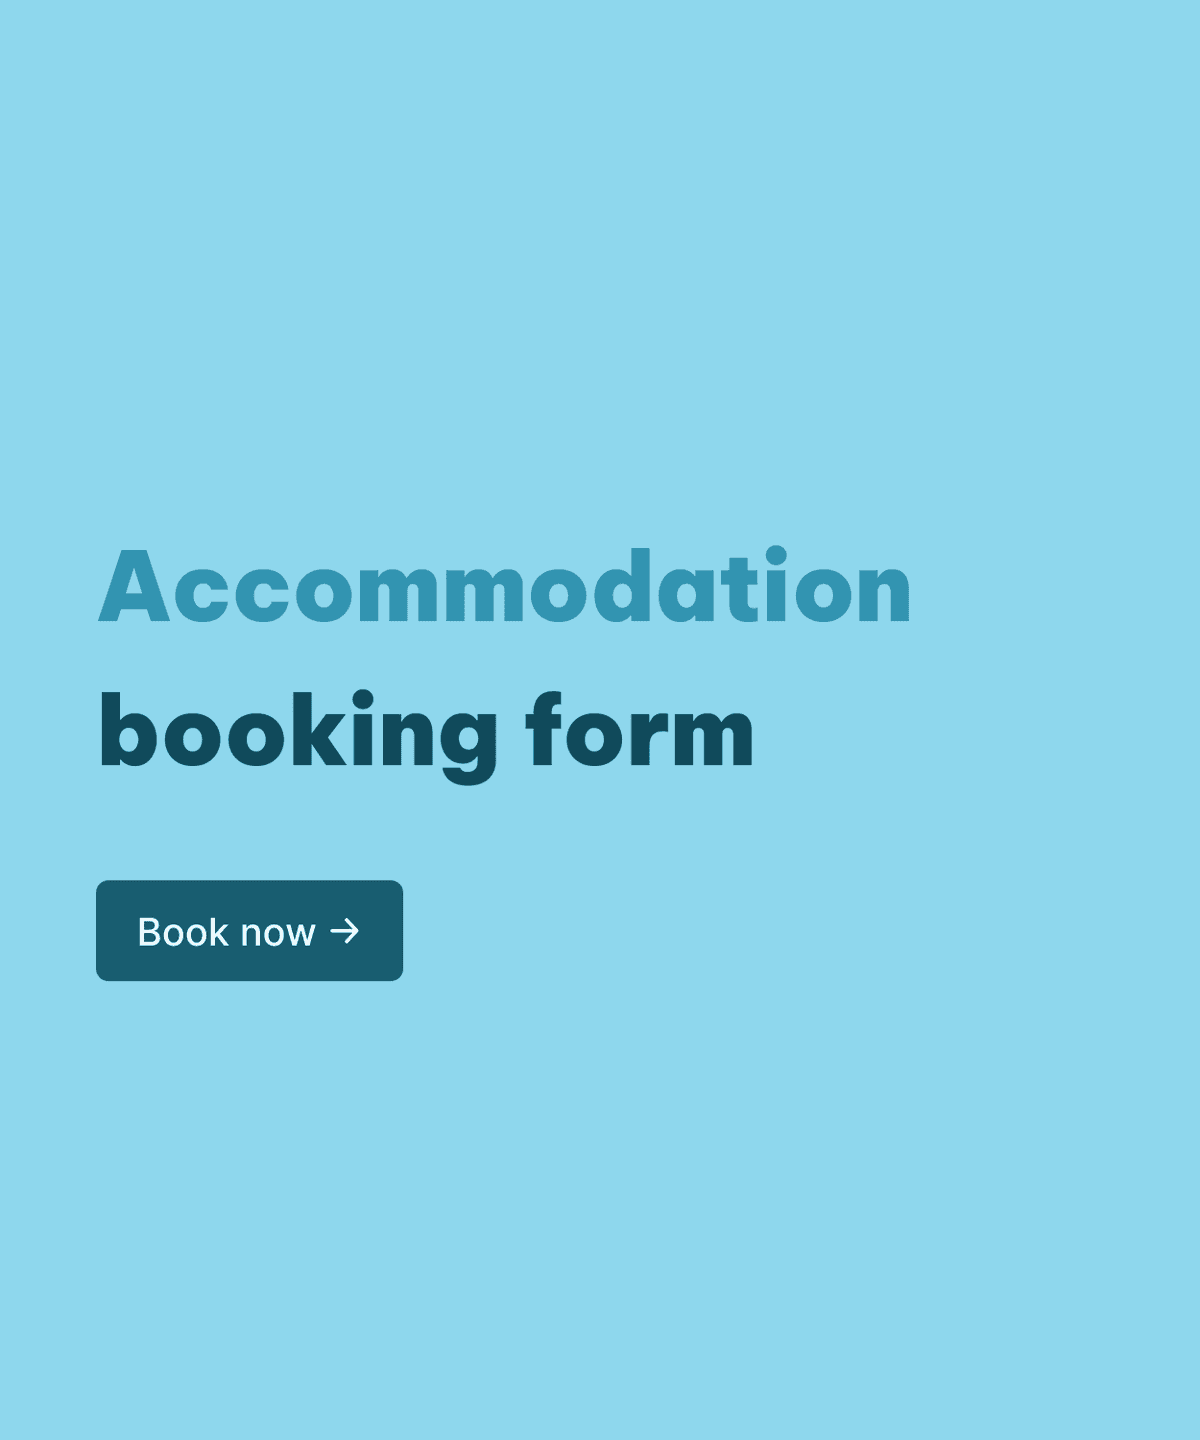 Welcome step of 'Accommodation booking form' with introduction text, and a 'Book now' button